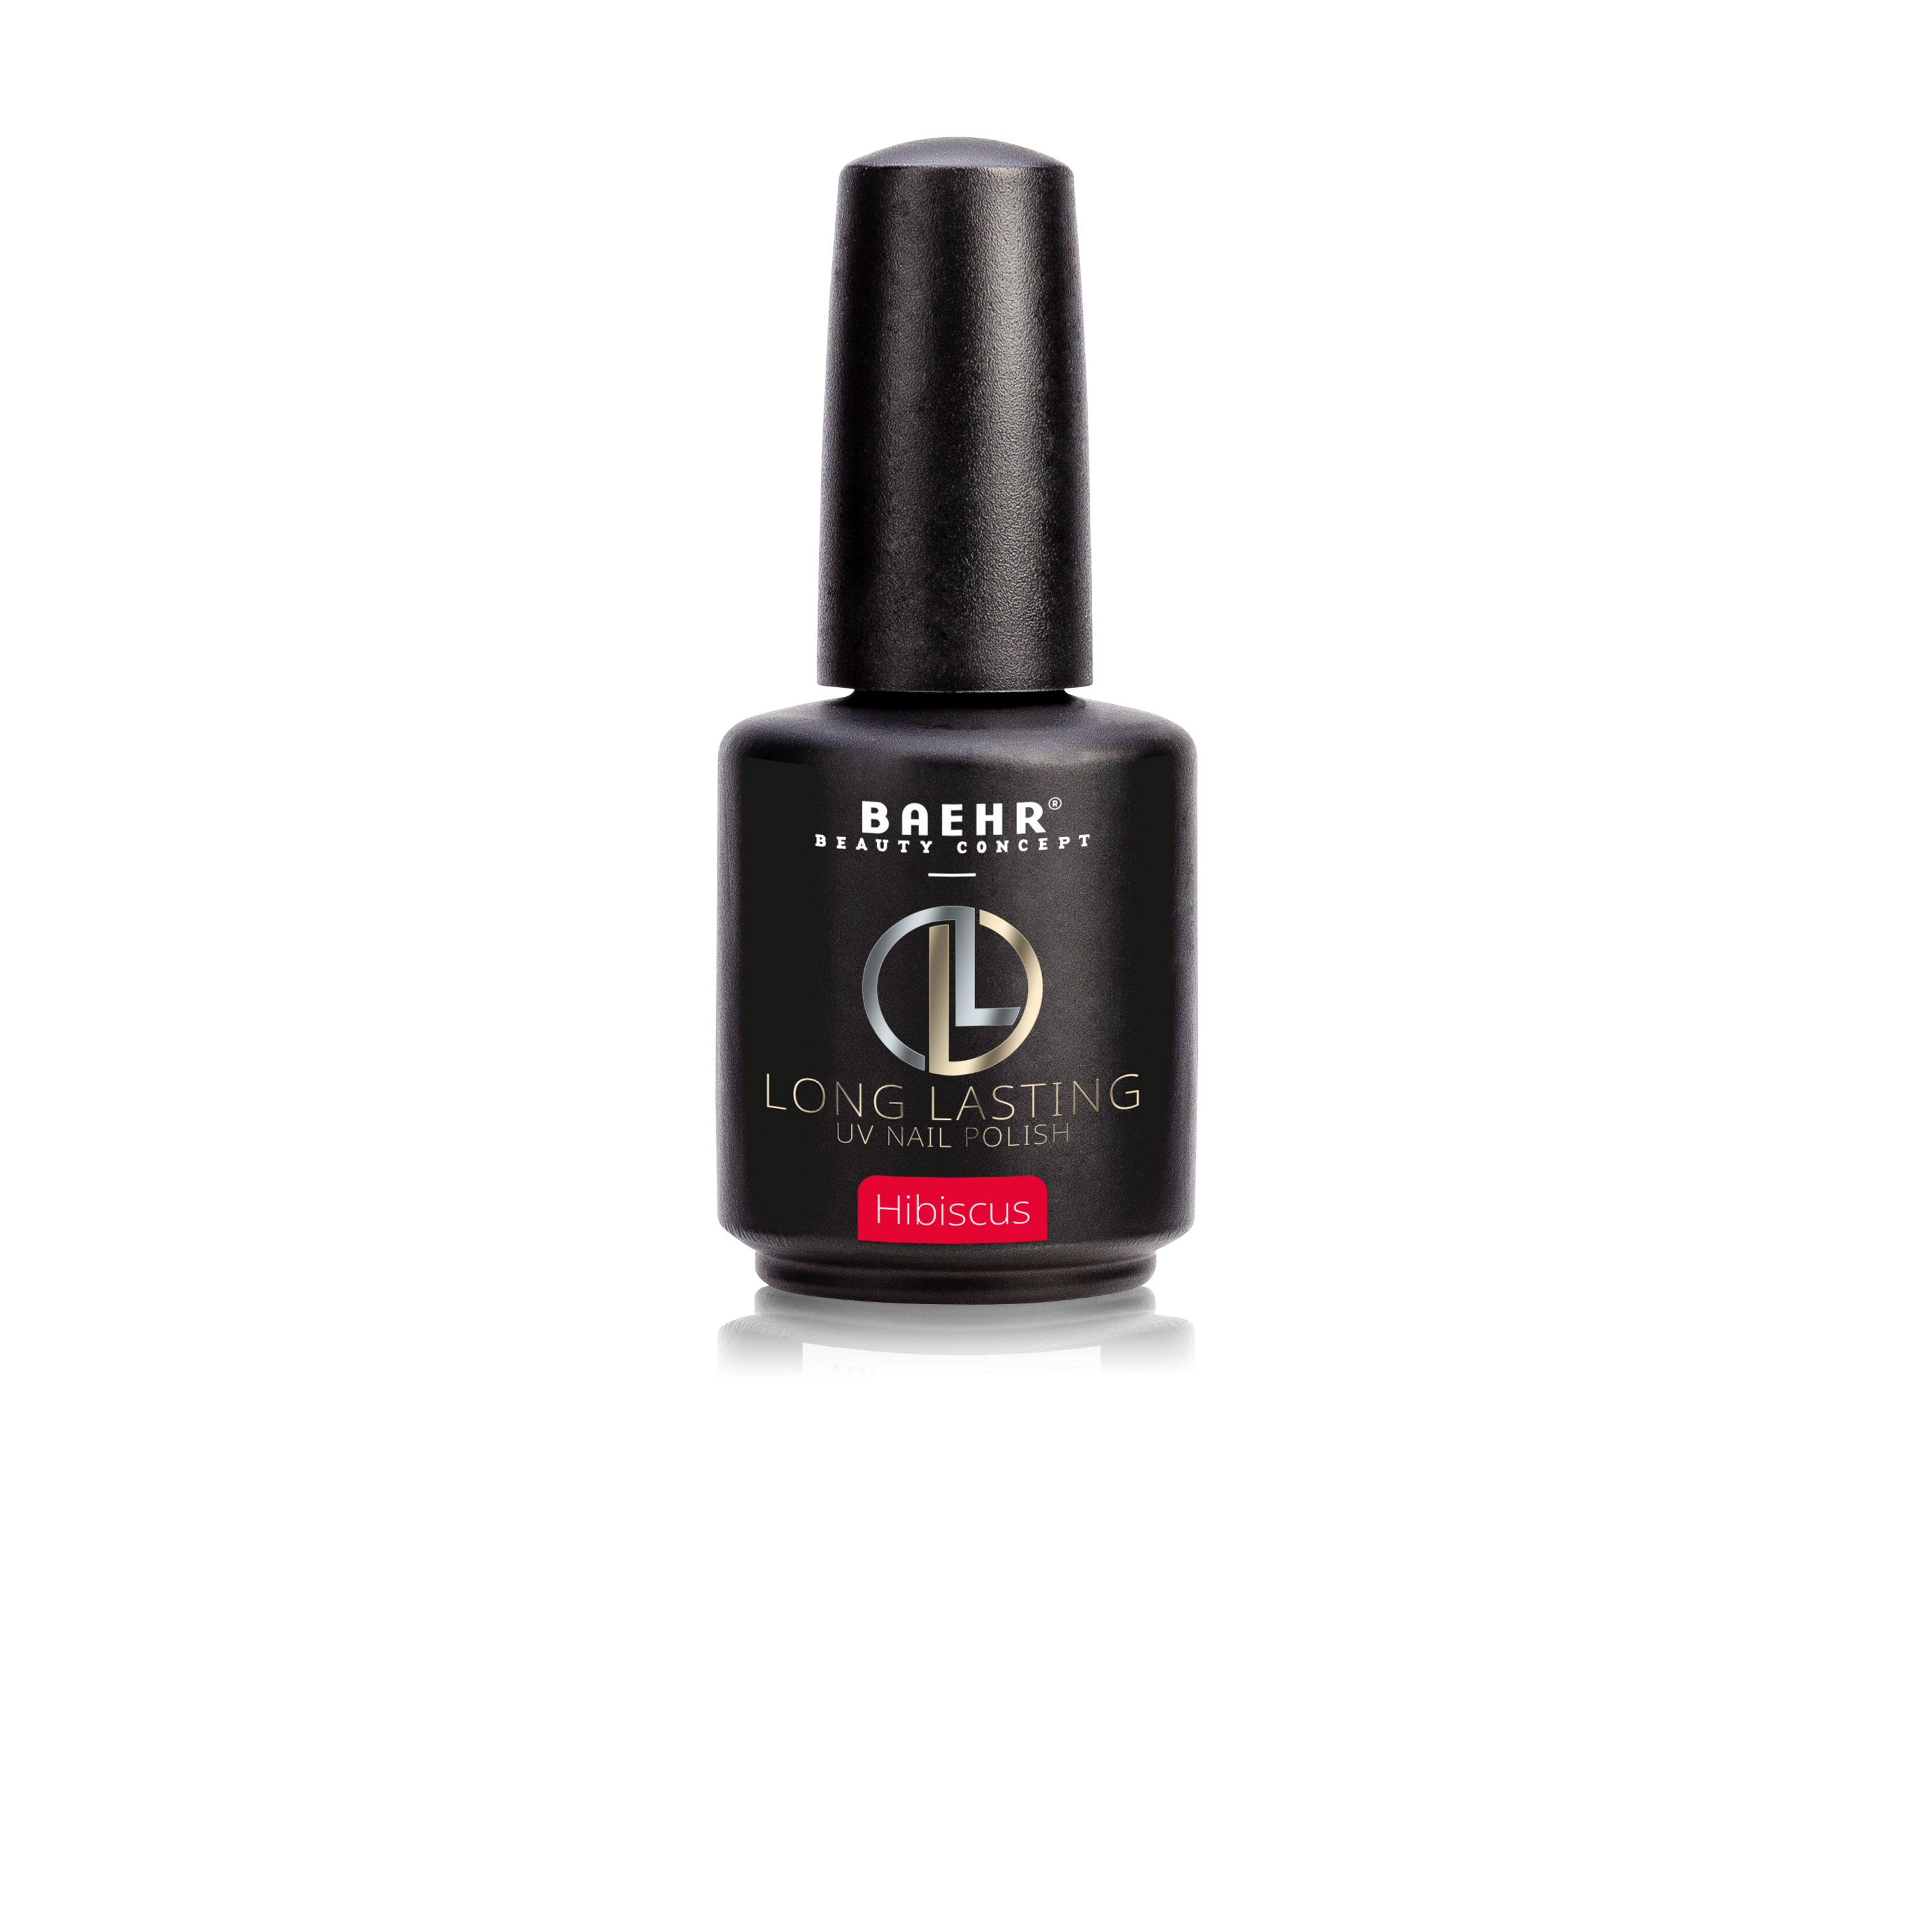 BAEHR BEAUTY CONCEPT - NAILS Long Lasting Hibiscus, 13 g